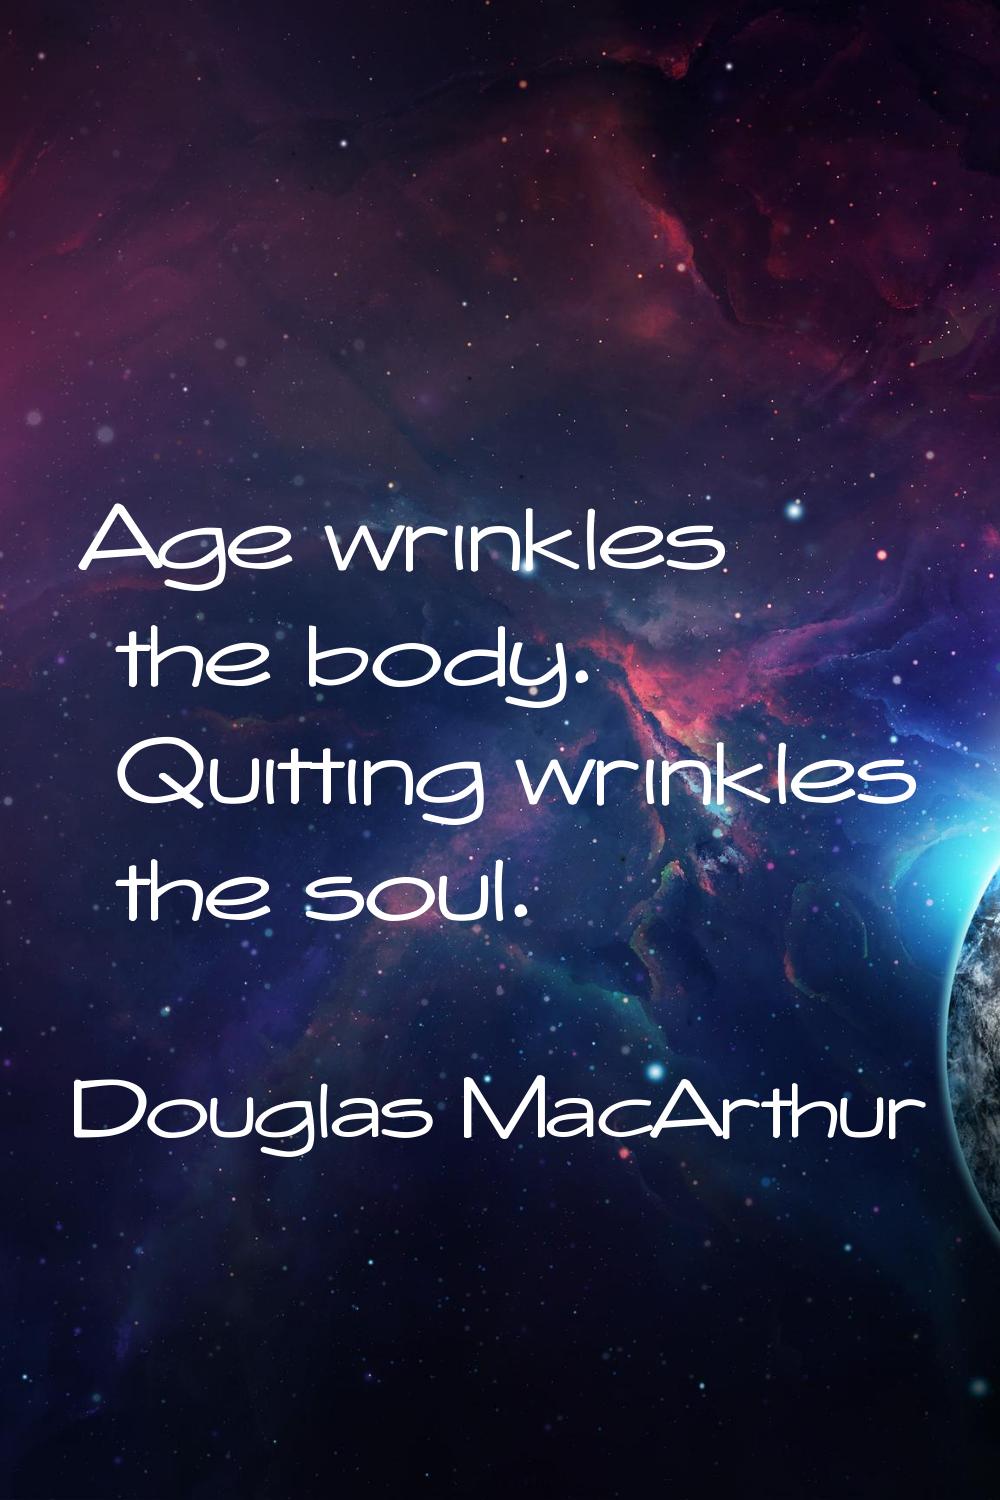 Age wrinkles the body. Quitting wrinkles the soul.